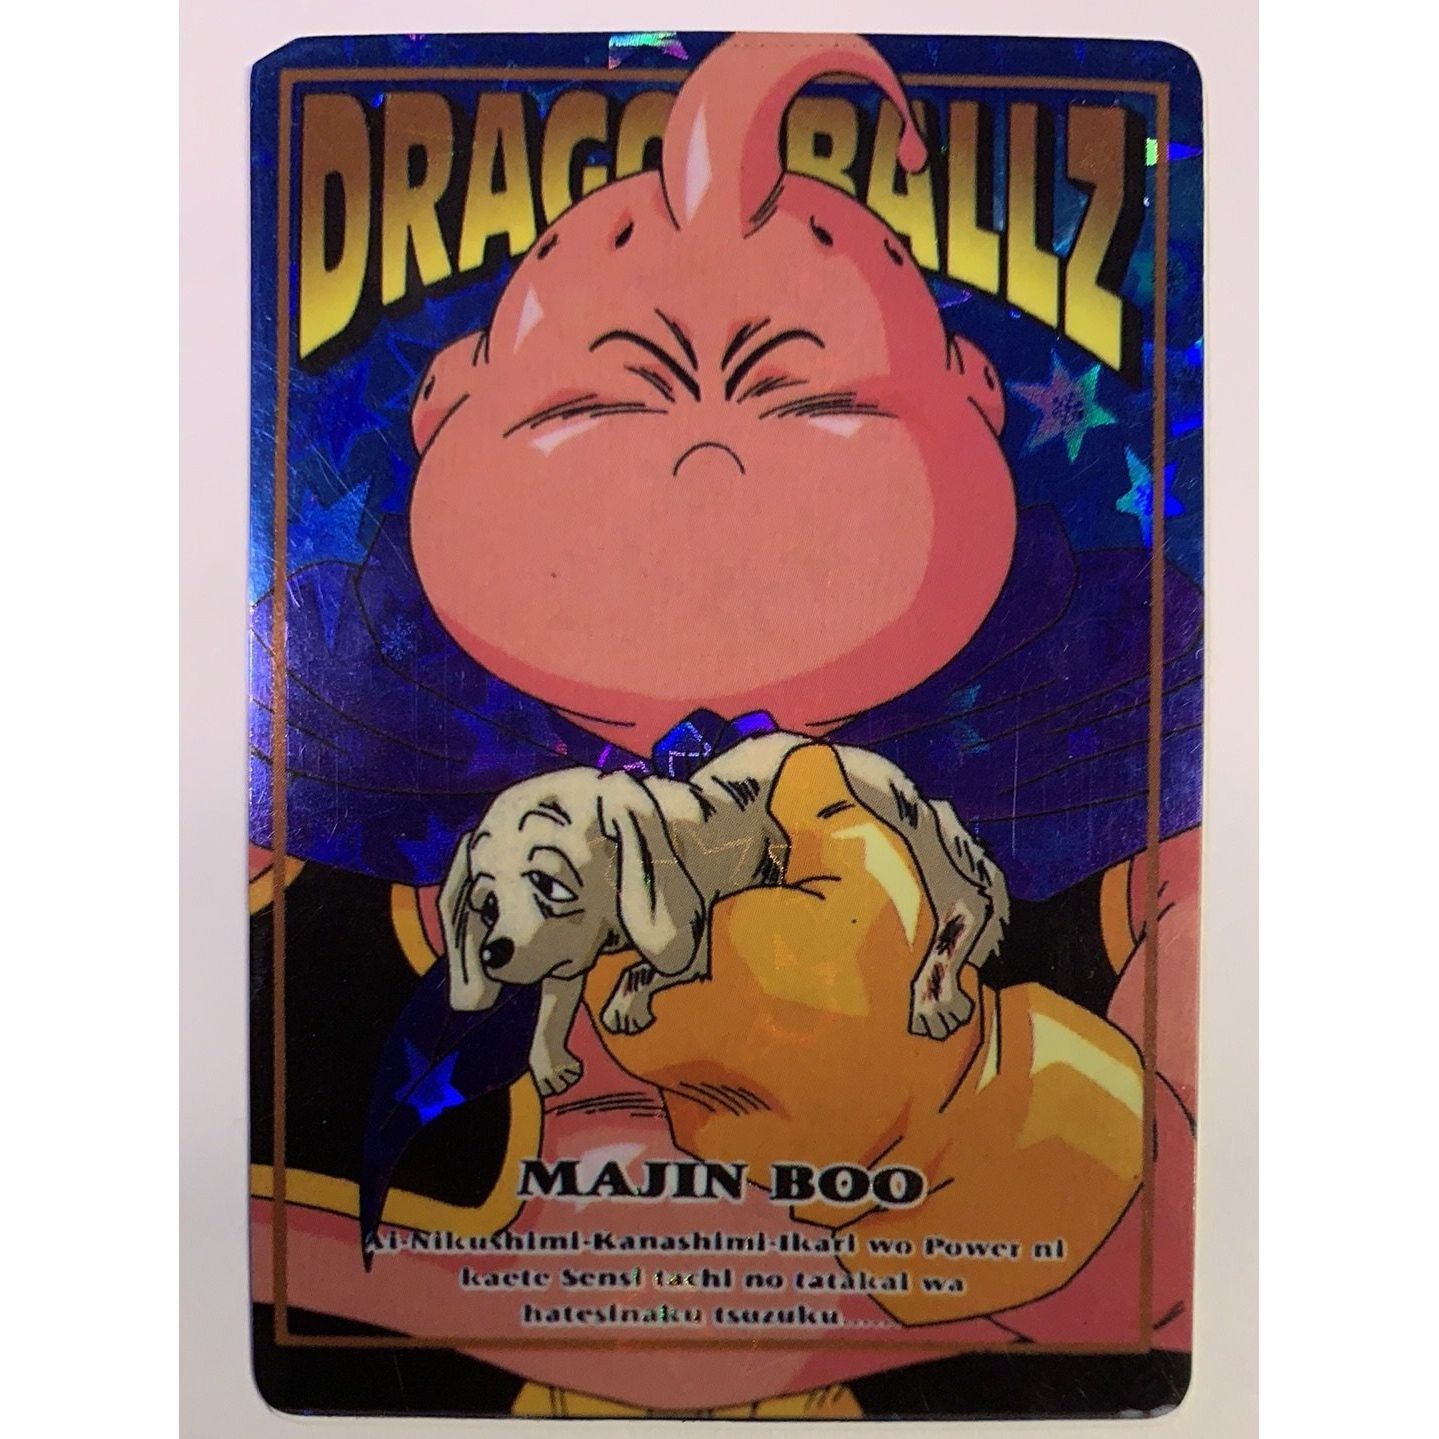  1995 Dragon Ball Z Memorial Photo Number 45 Majin Boo Blue Prism Cardass Japanese Vending Machine Sticker  Local Legends Cards & Collectibles